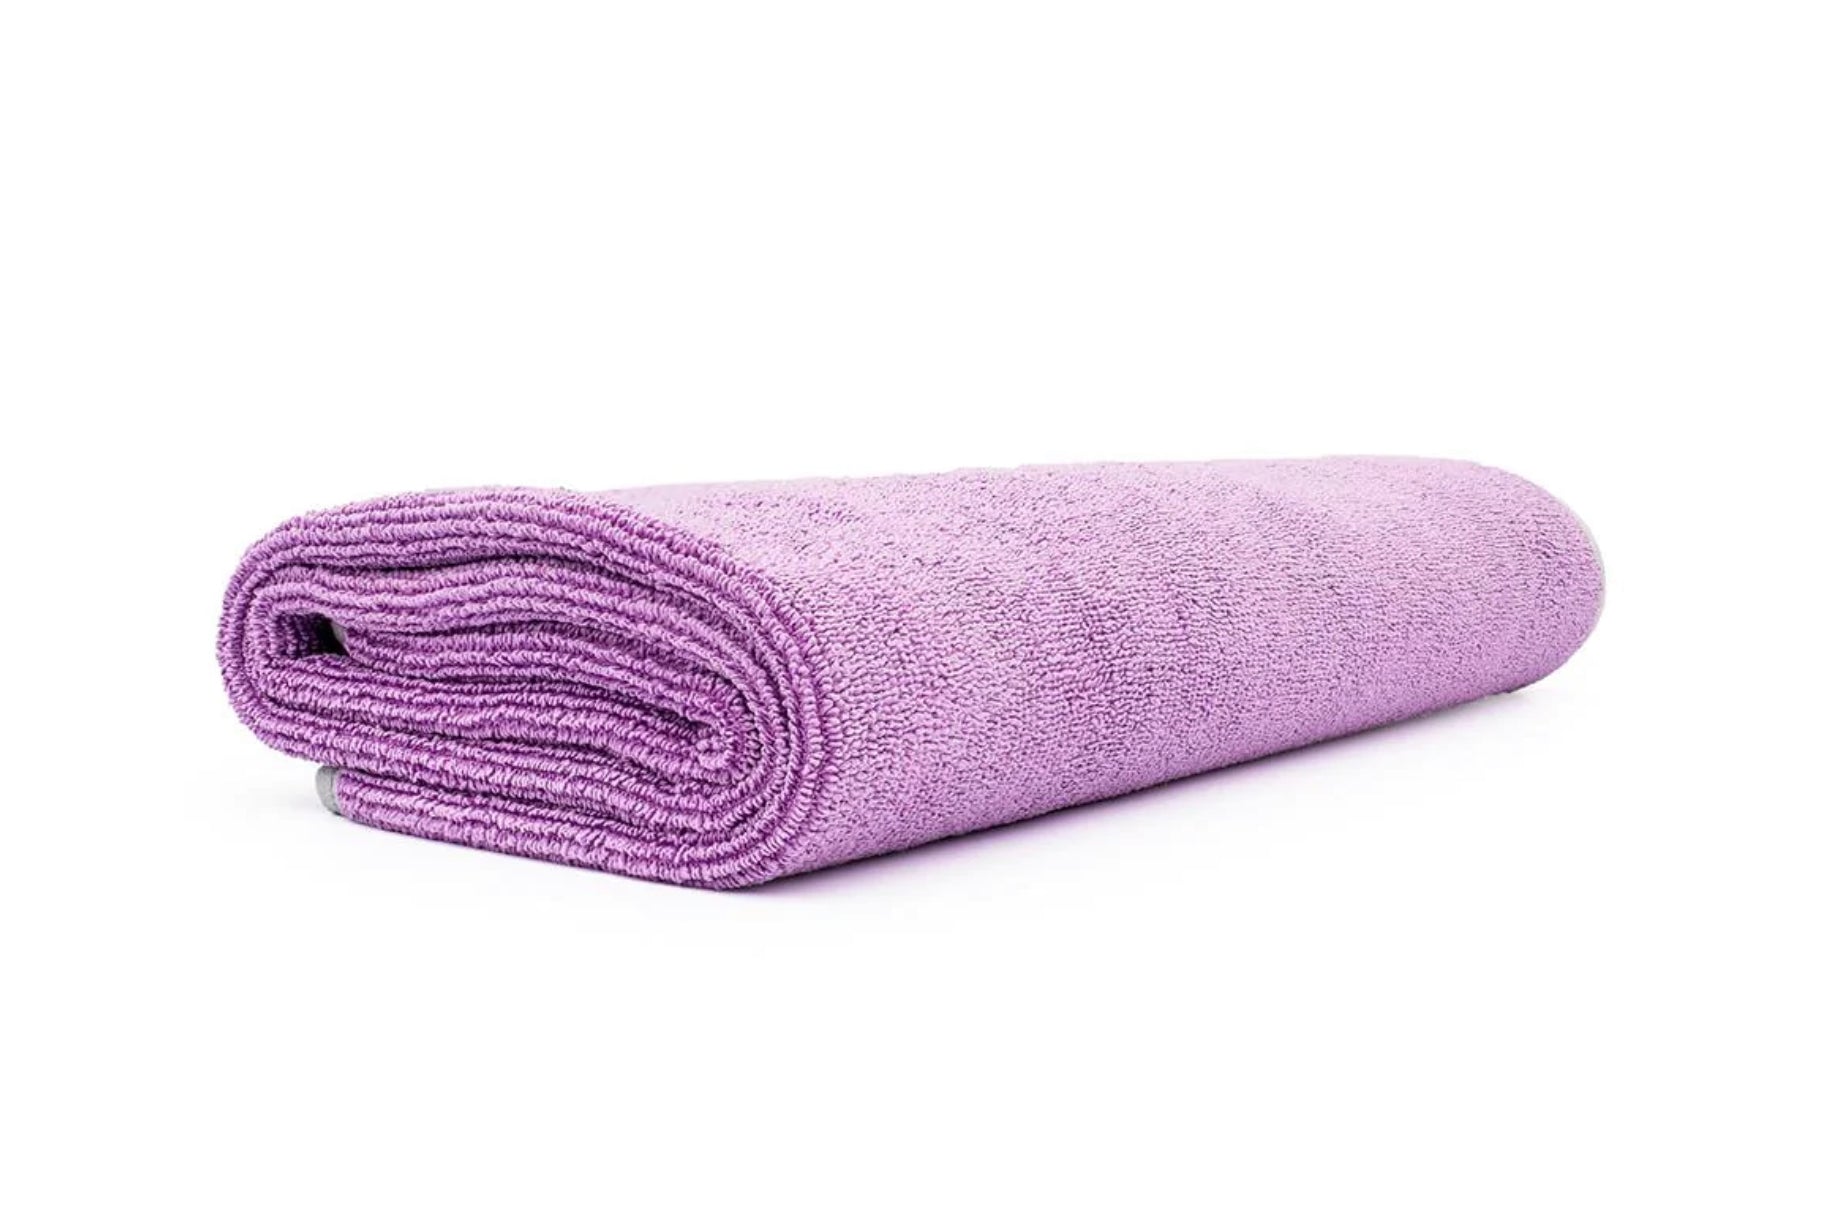 Review - The Rag Company - Twist N' Shout drying towel : r